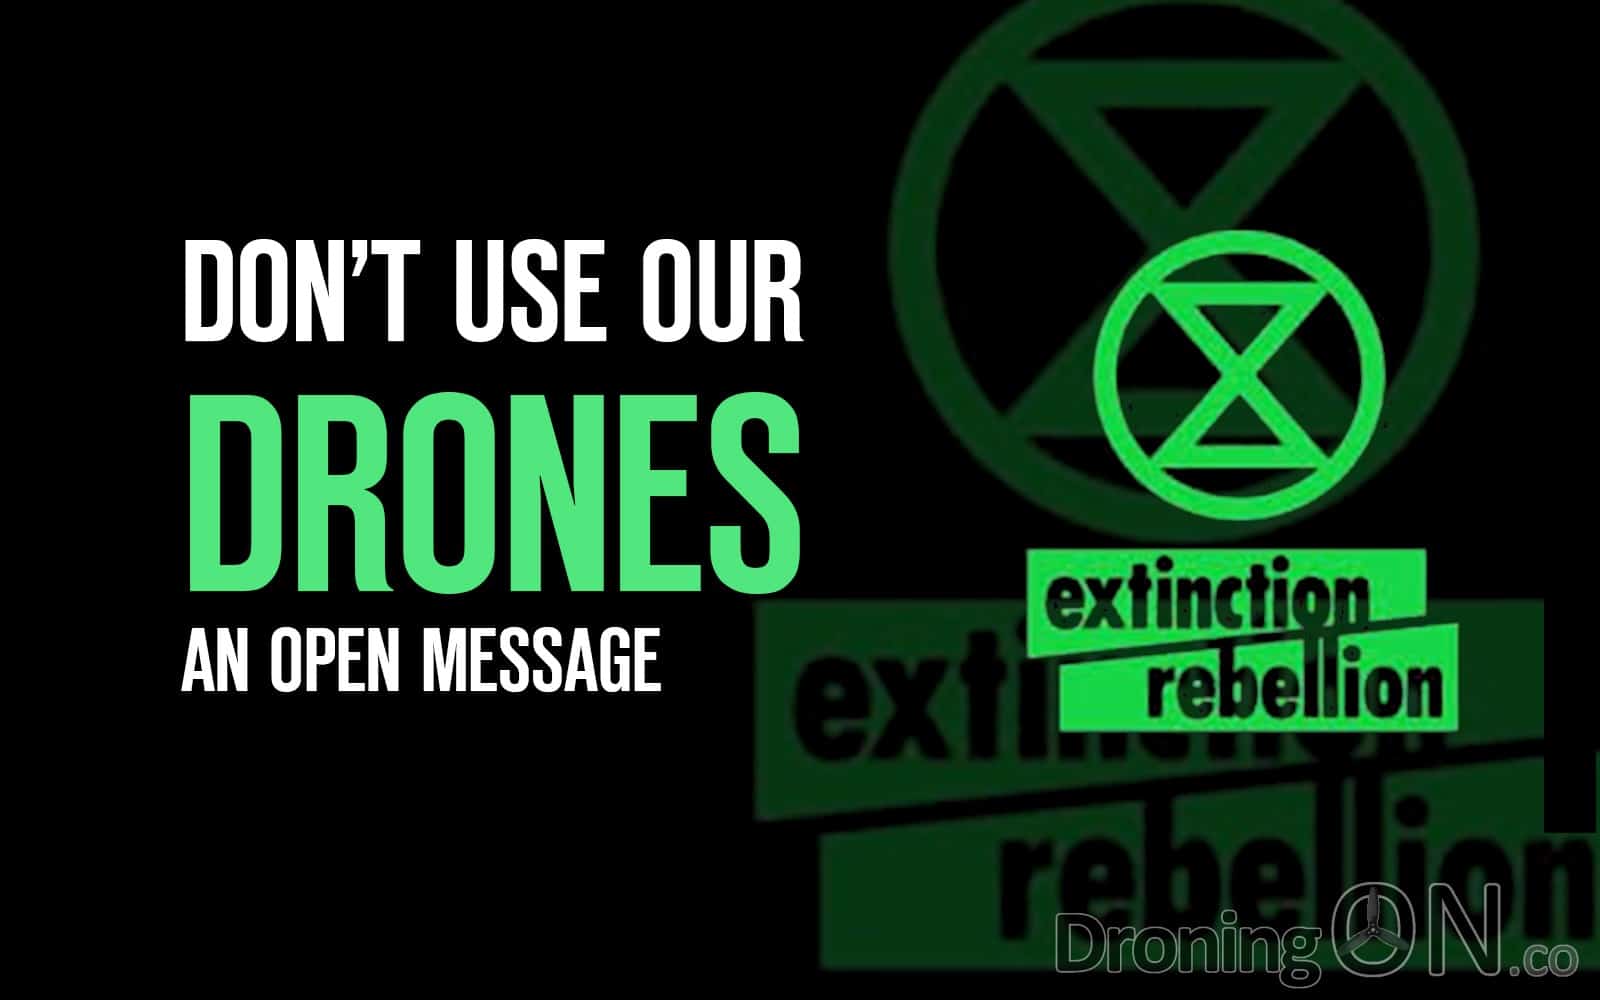 Extinction Rebellion are threatening use of drones at Heathrow, the UK's busiest airport